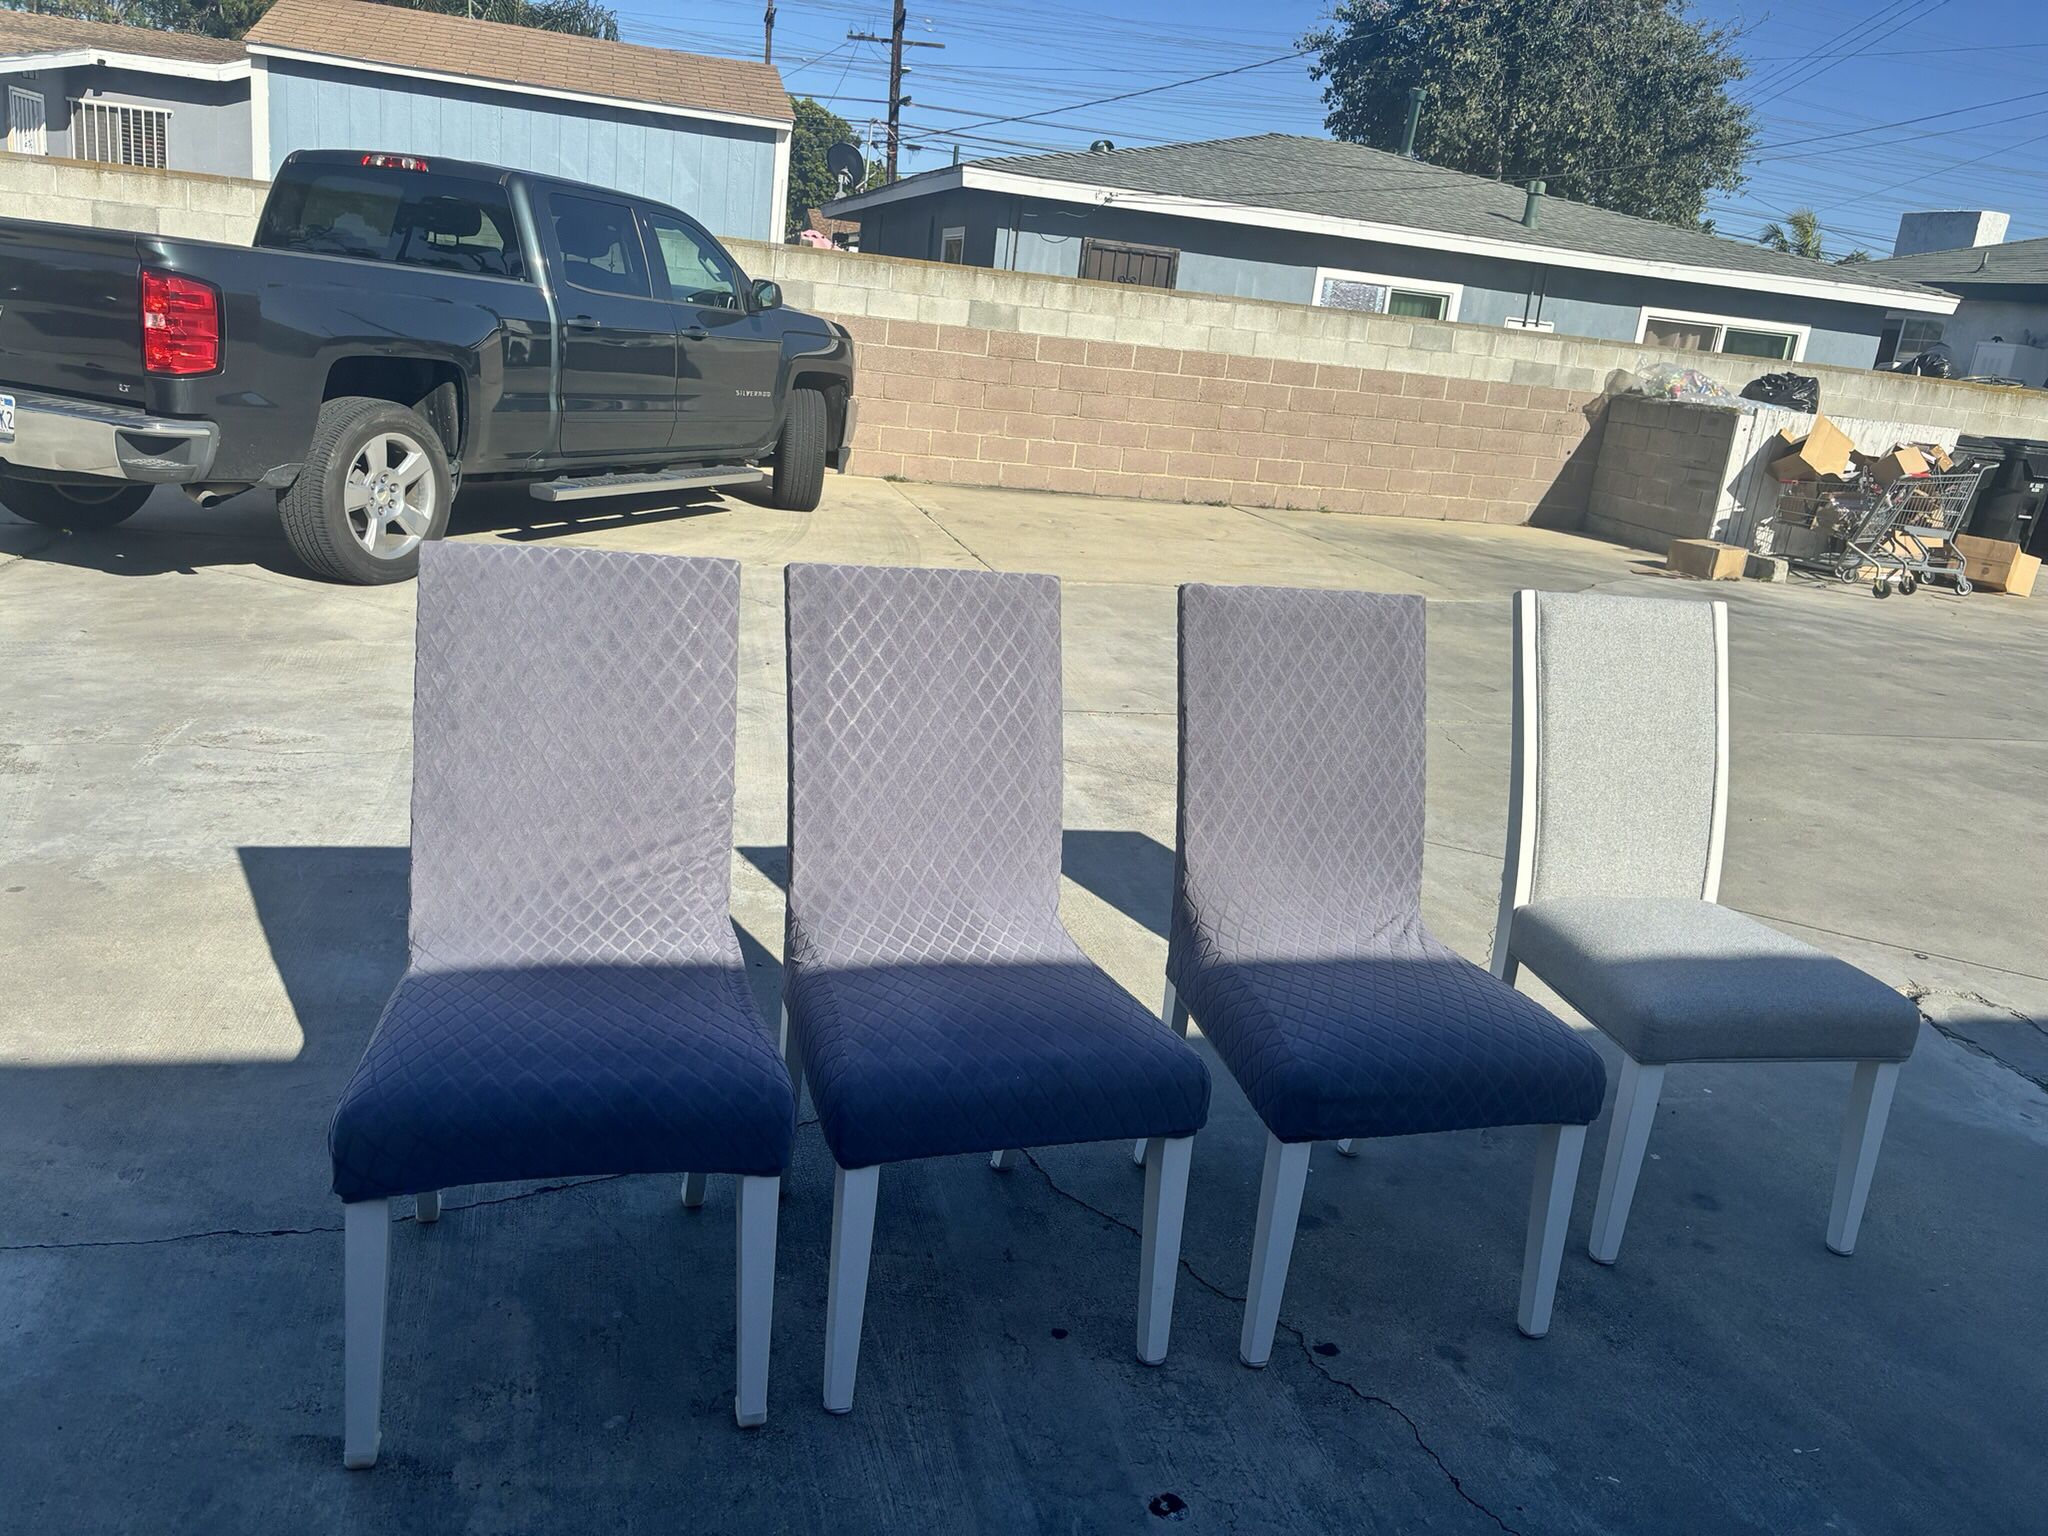 6 chairs brand new $150 Firm  for all 6 comes with waterproof covers 